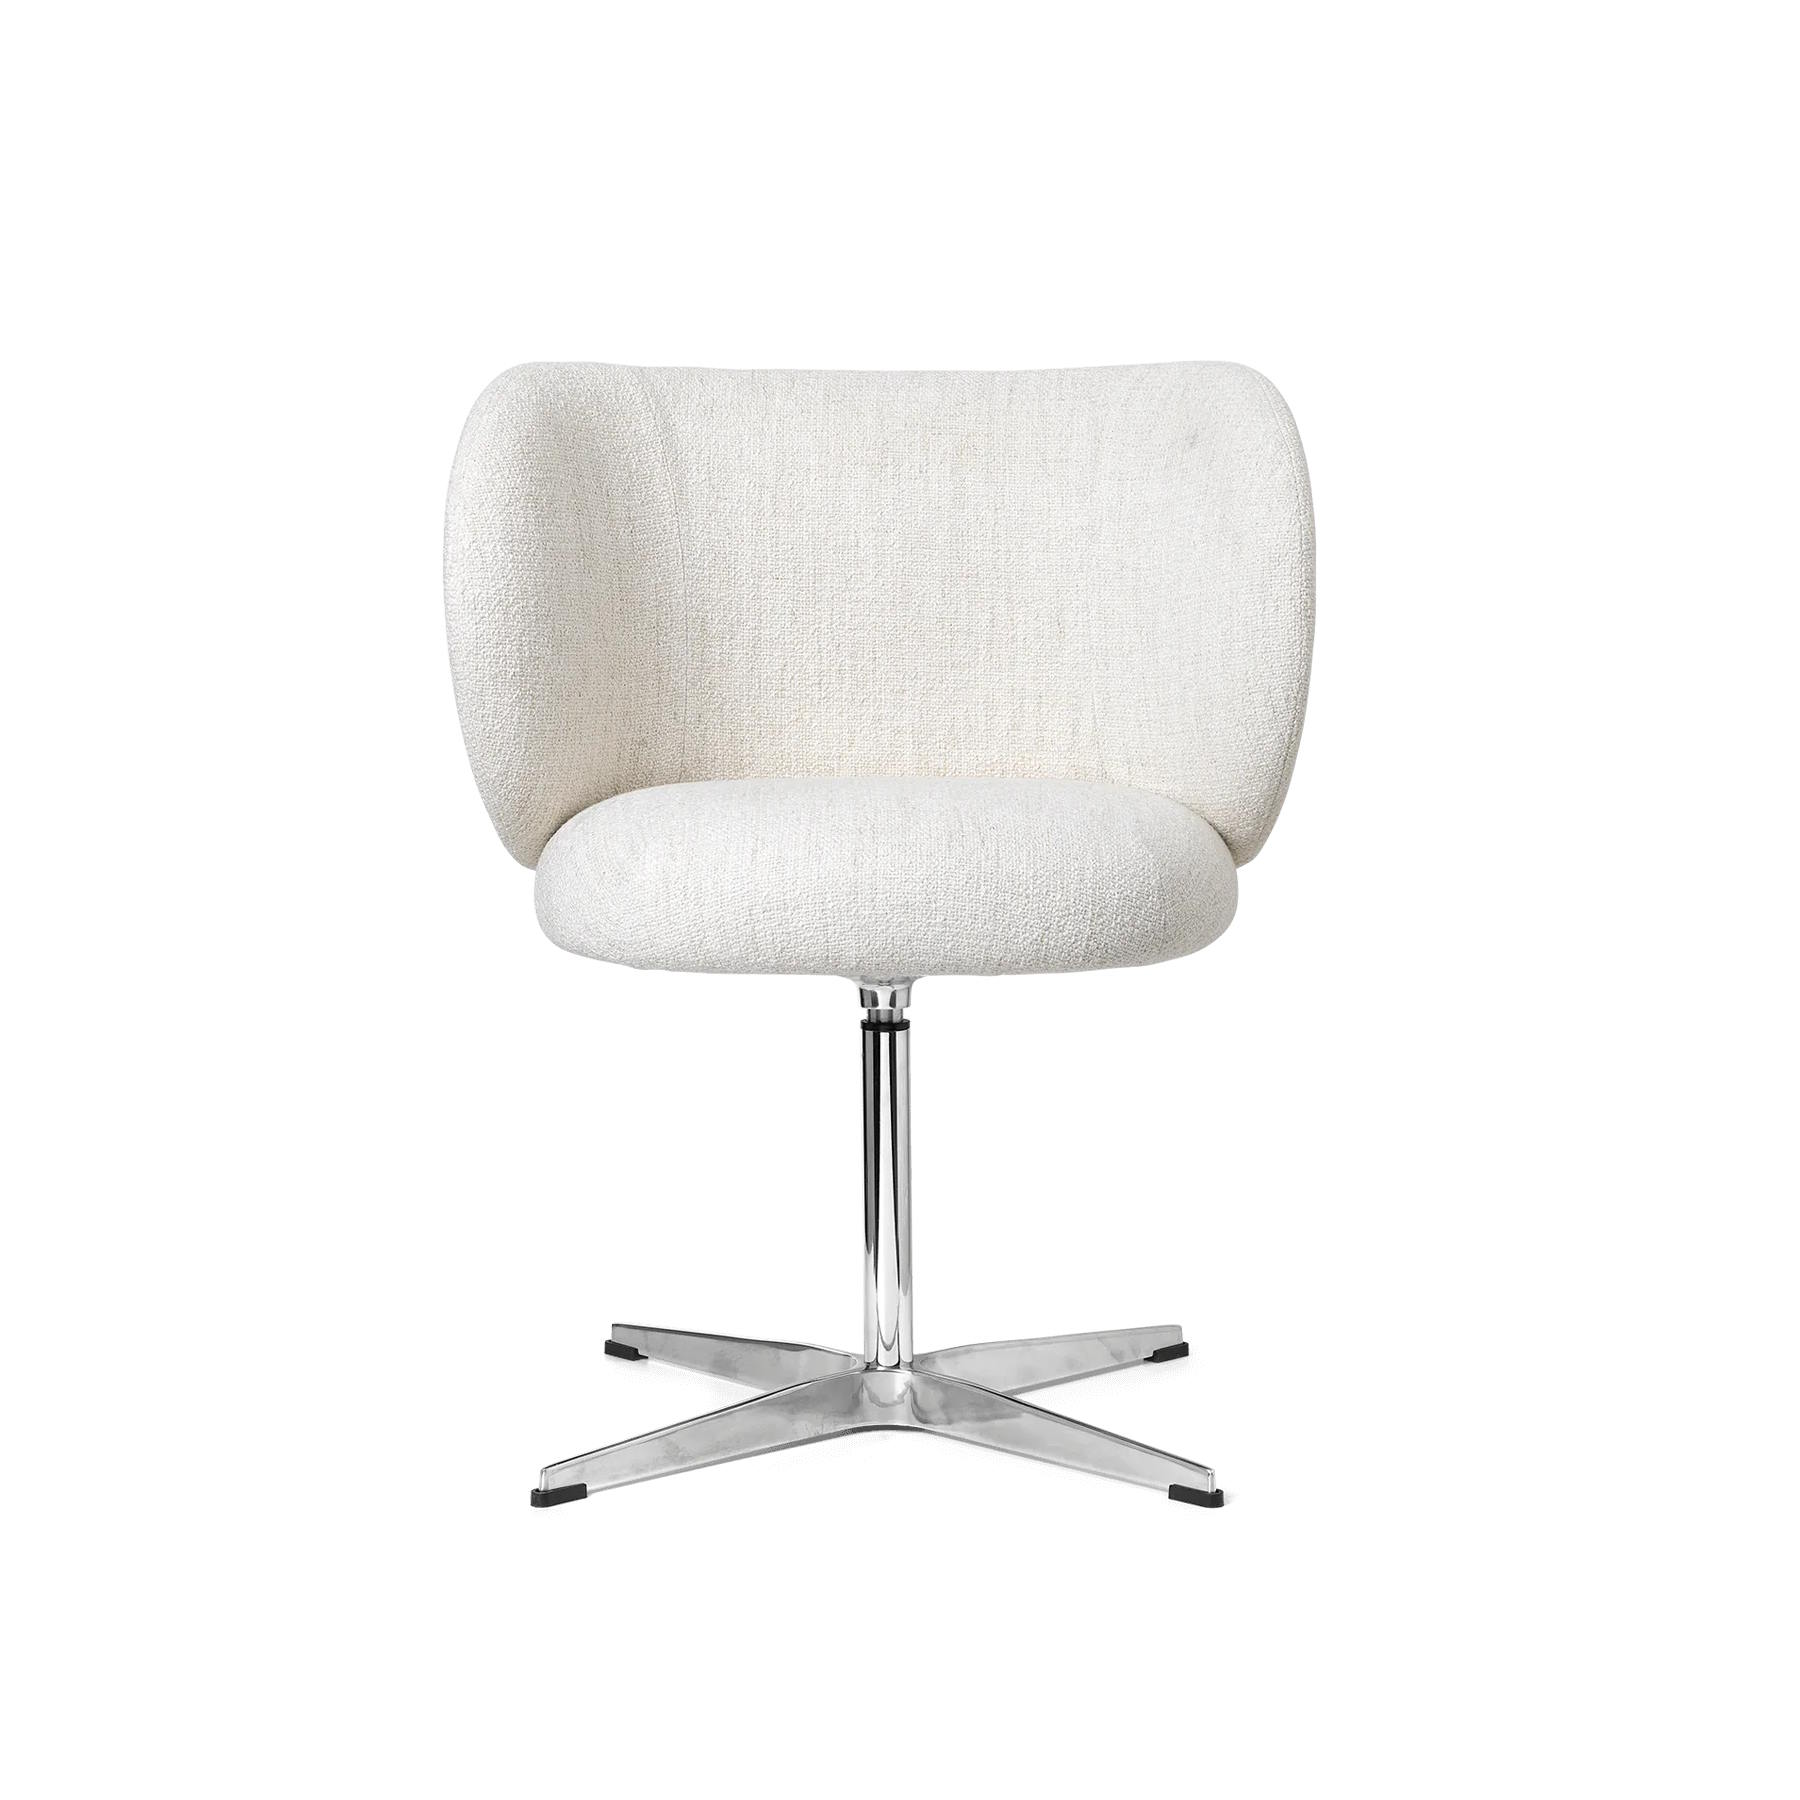 Snurrstol Rico Dining Swivel off white Ferm Living